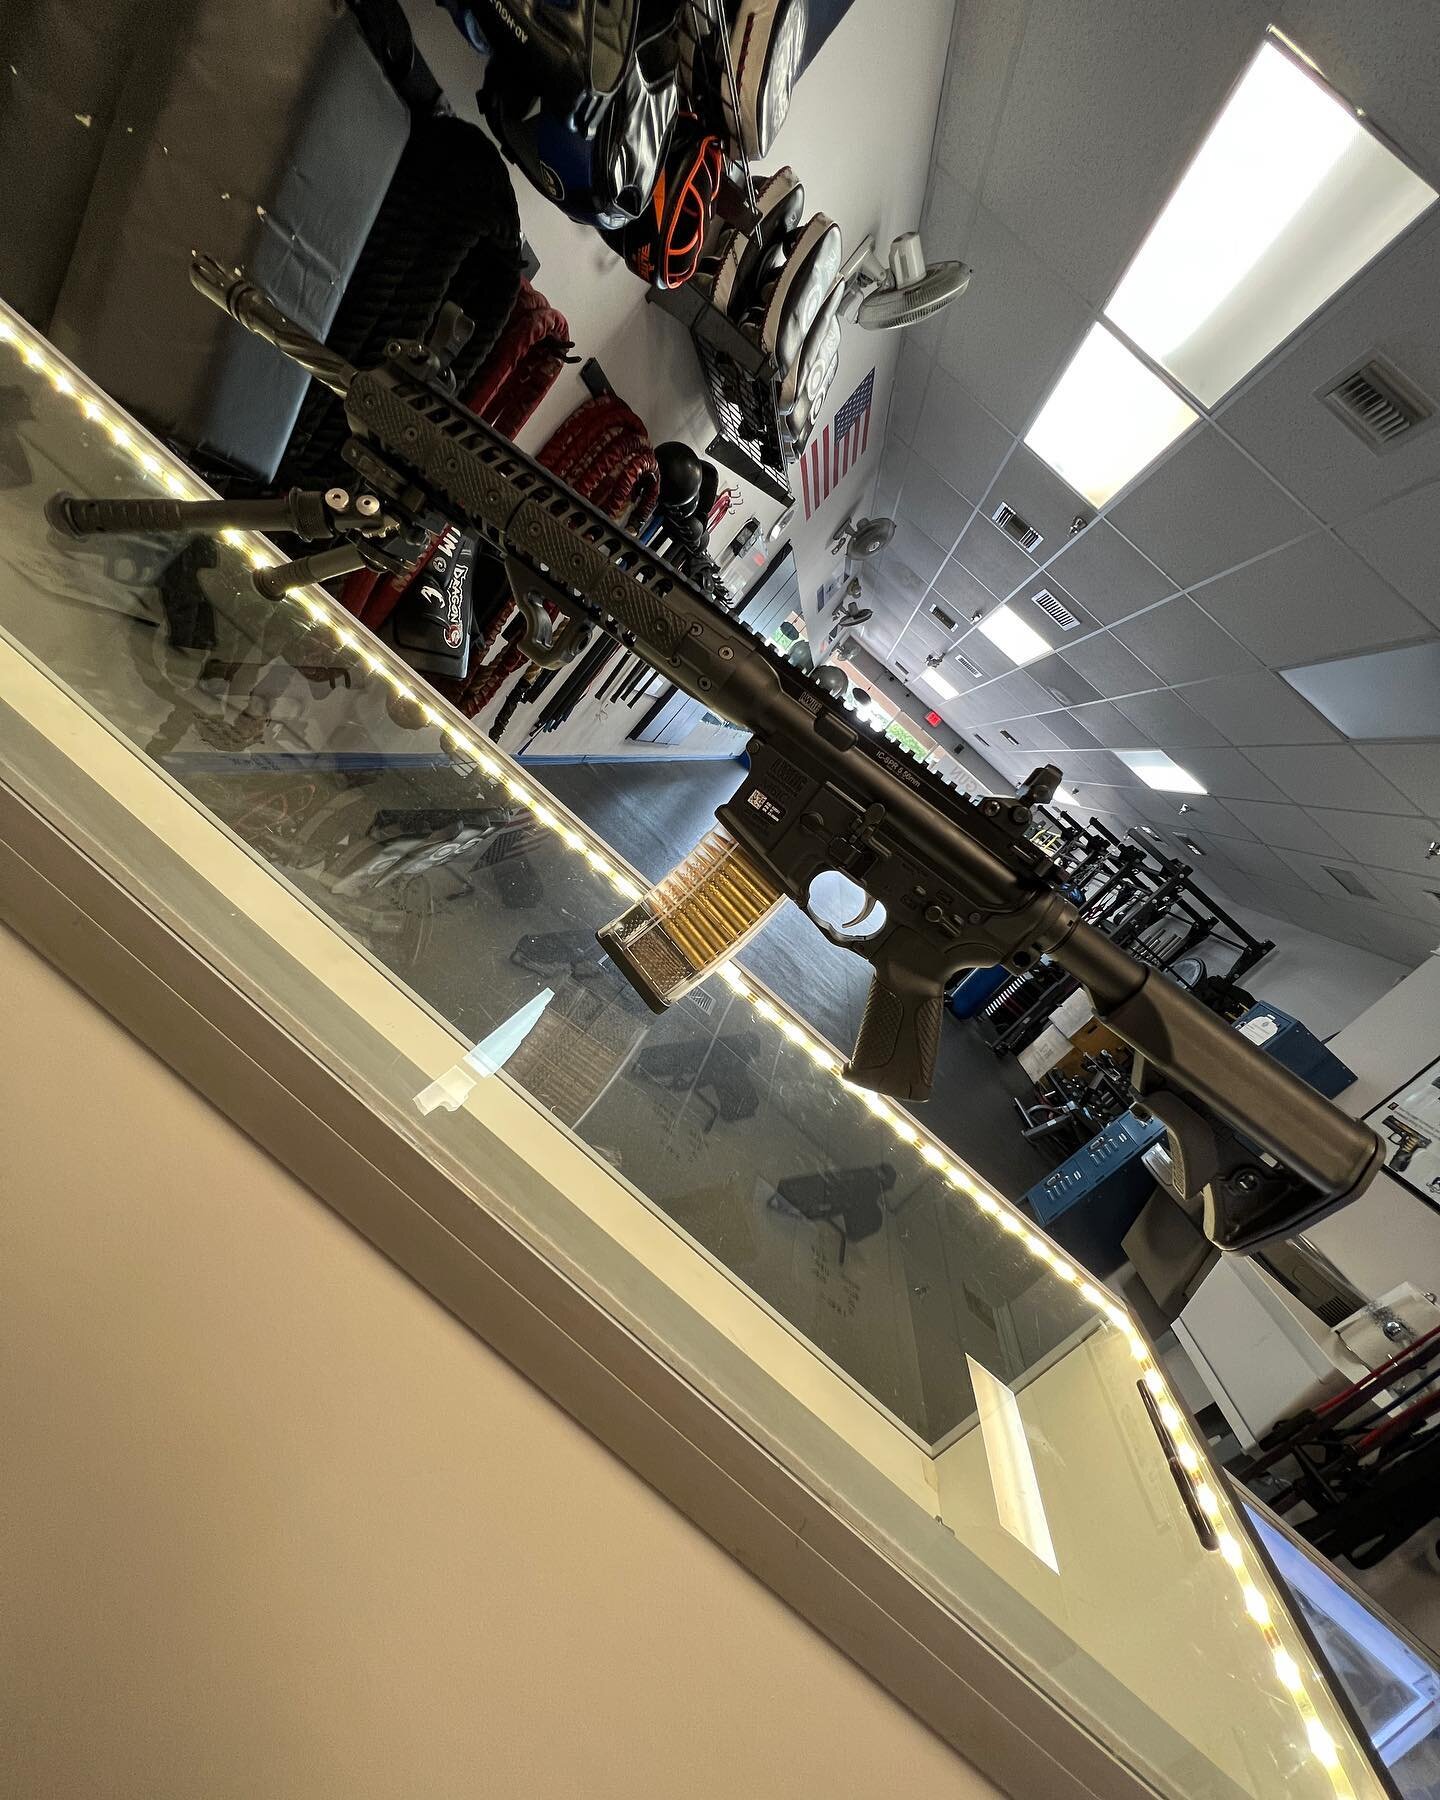 Special Order LWRC IC-SPR for a happy client
Come see us for any of your firearm needs!
Our services include:
-Specialty orders + rare firearm procurement
-Customization + parts installation 
-Transfers, sales, and trade-ins 
-Gun cleaning services 
